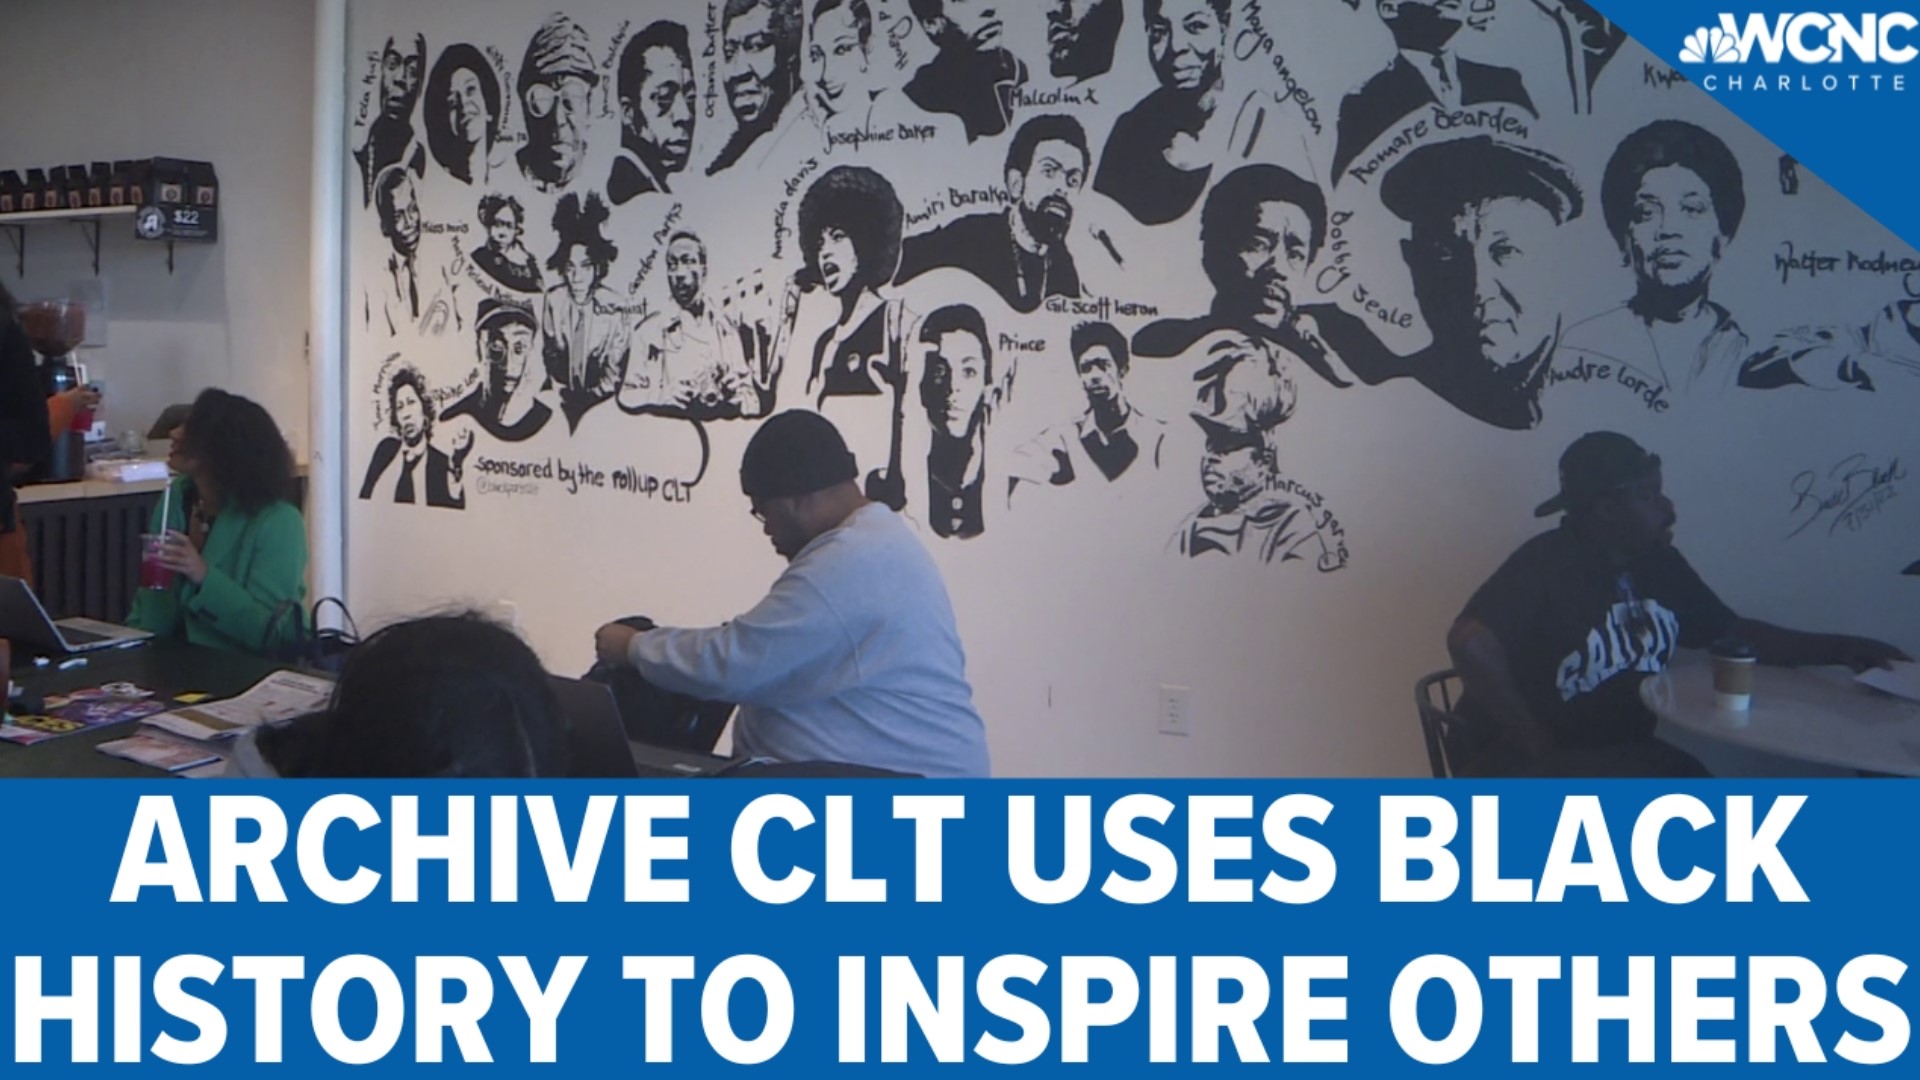 Archive CLT's owner is using Black history and literature to serve up inspiration to her customers as evidence of what can be achieved.